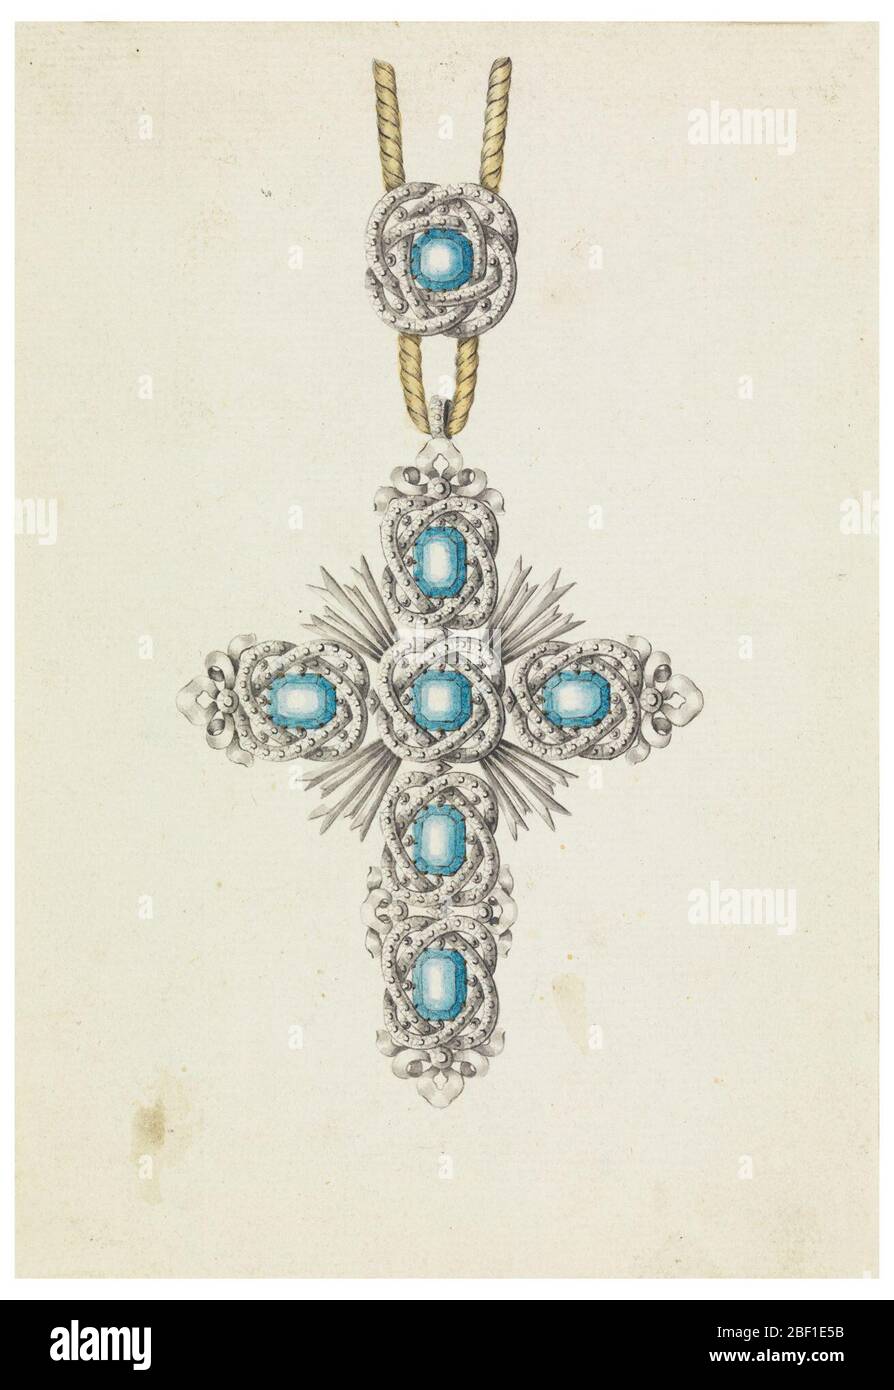 Design for a Cross Pendant. Jewelry design for a pendant in the form of a cross. Hanging from a cord which is fastened by an agraffe (metal clasp); a blue diamond framed by an interlaced band composed of white diamonds. Stock Photo